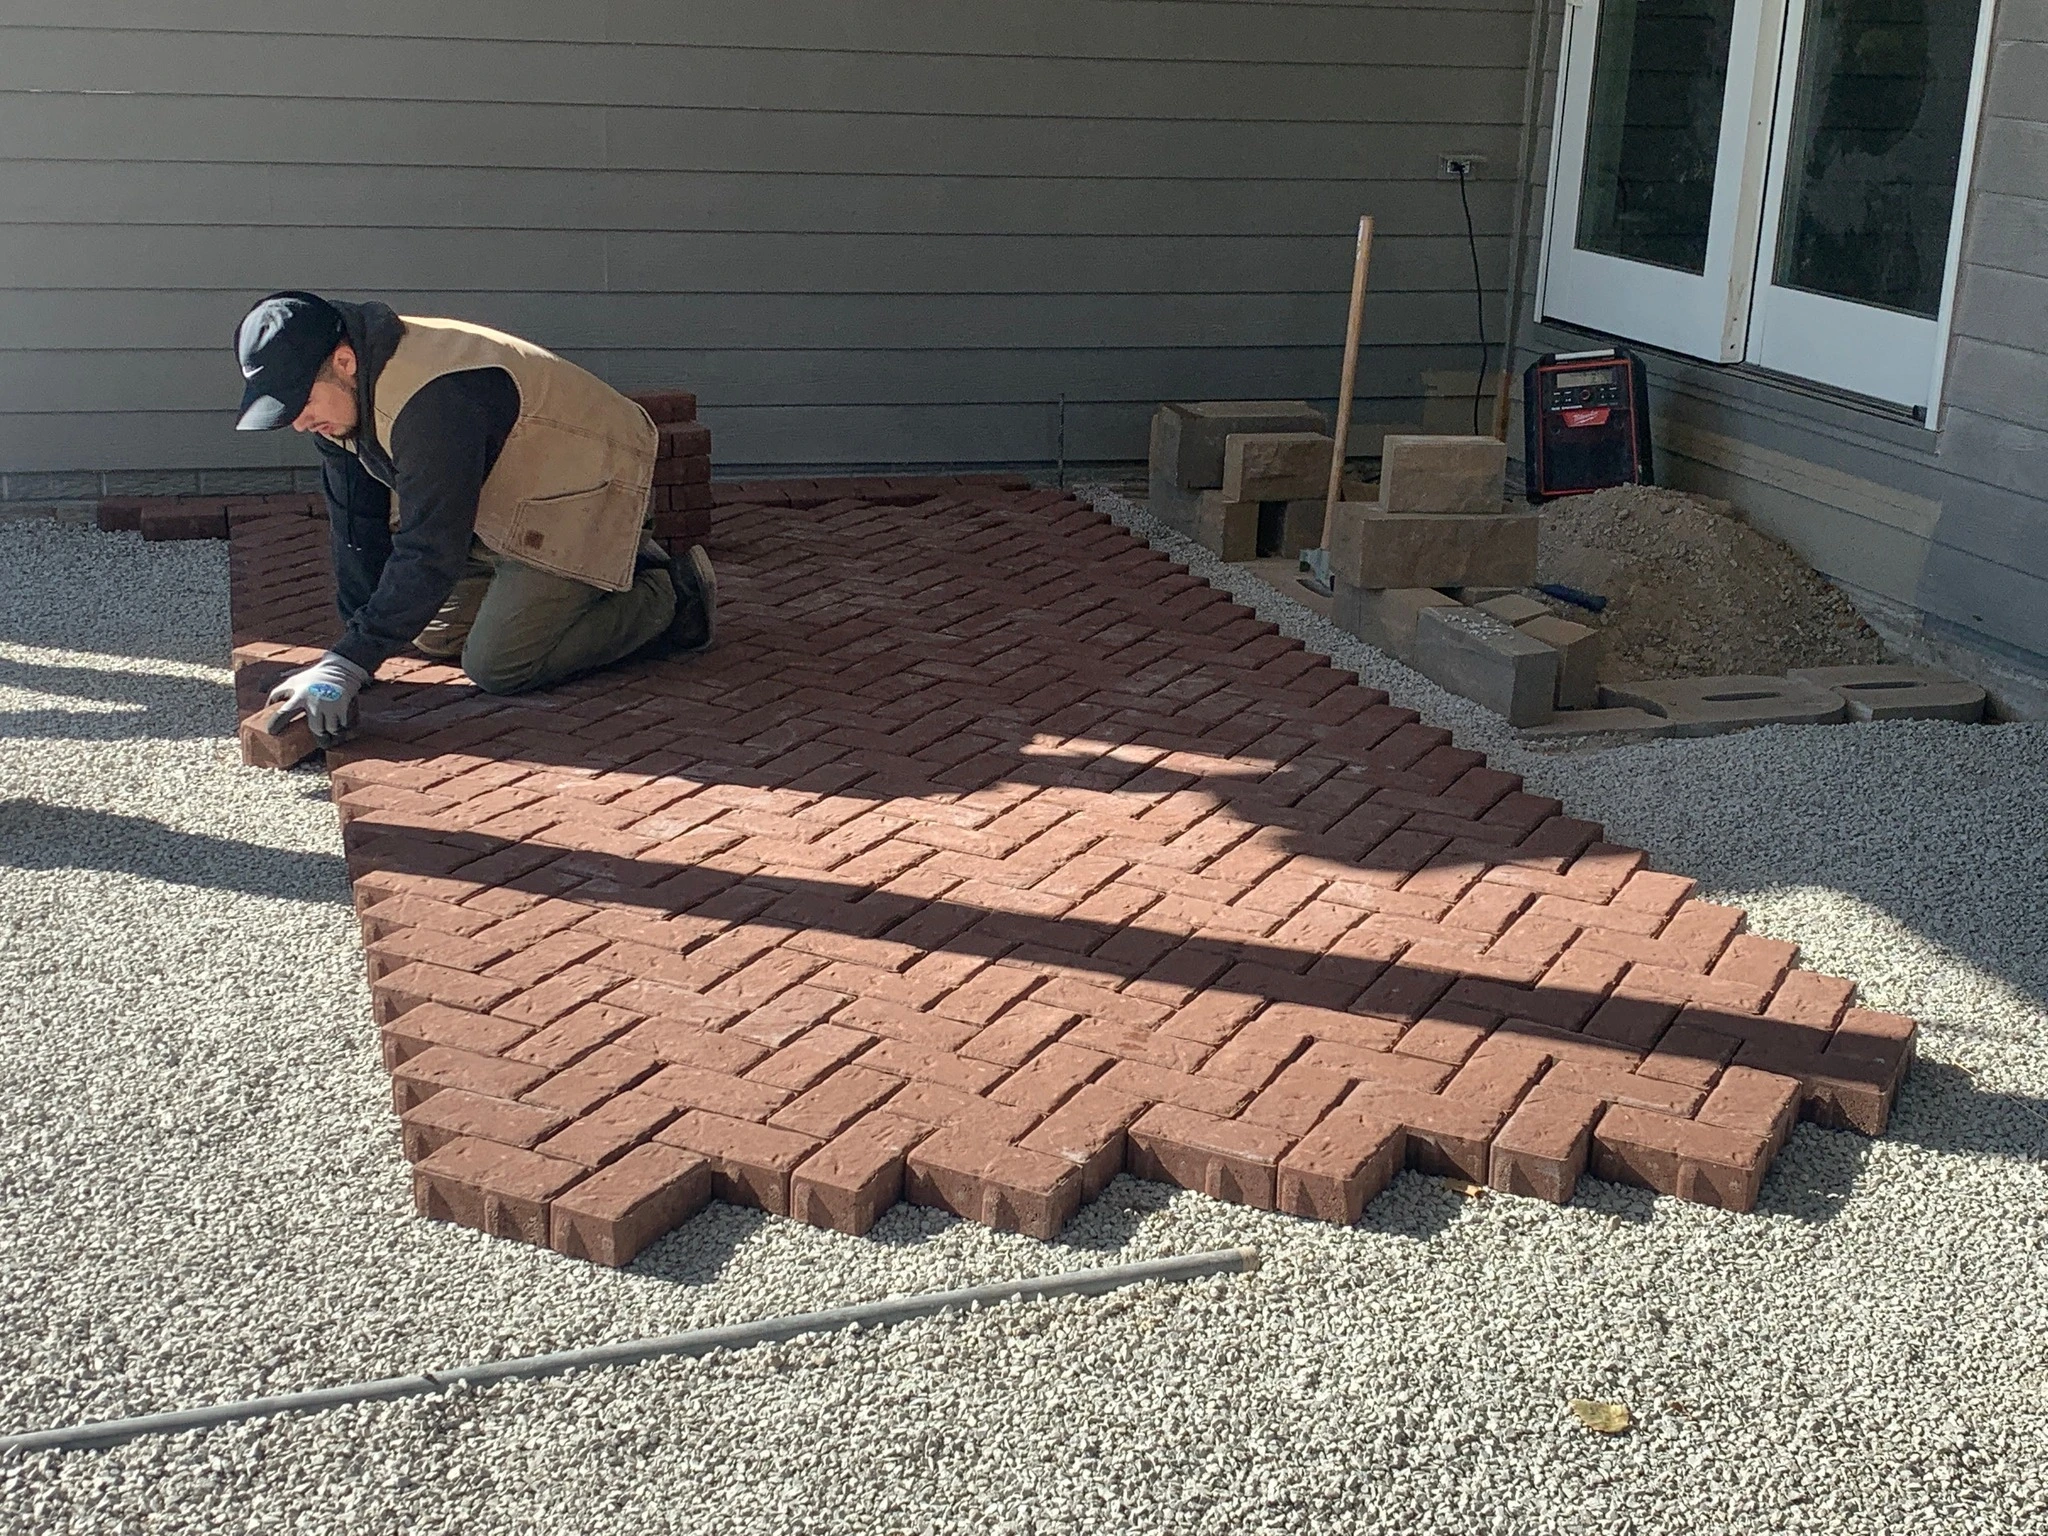 Professional laying pavers for patio build.